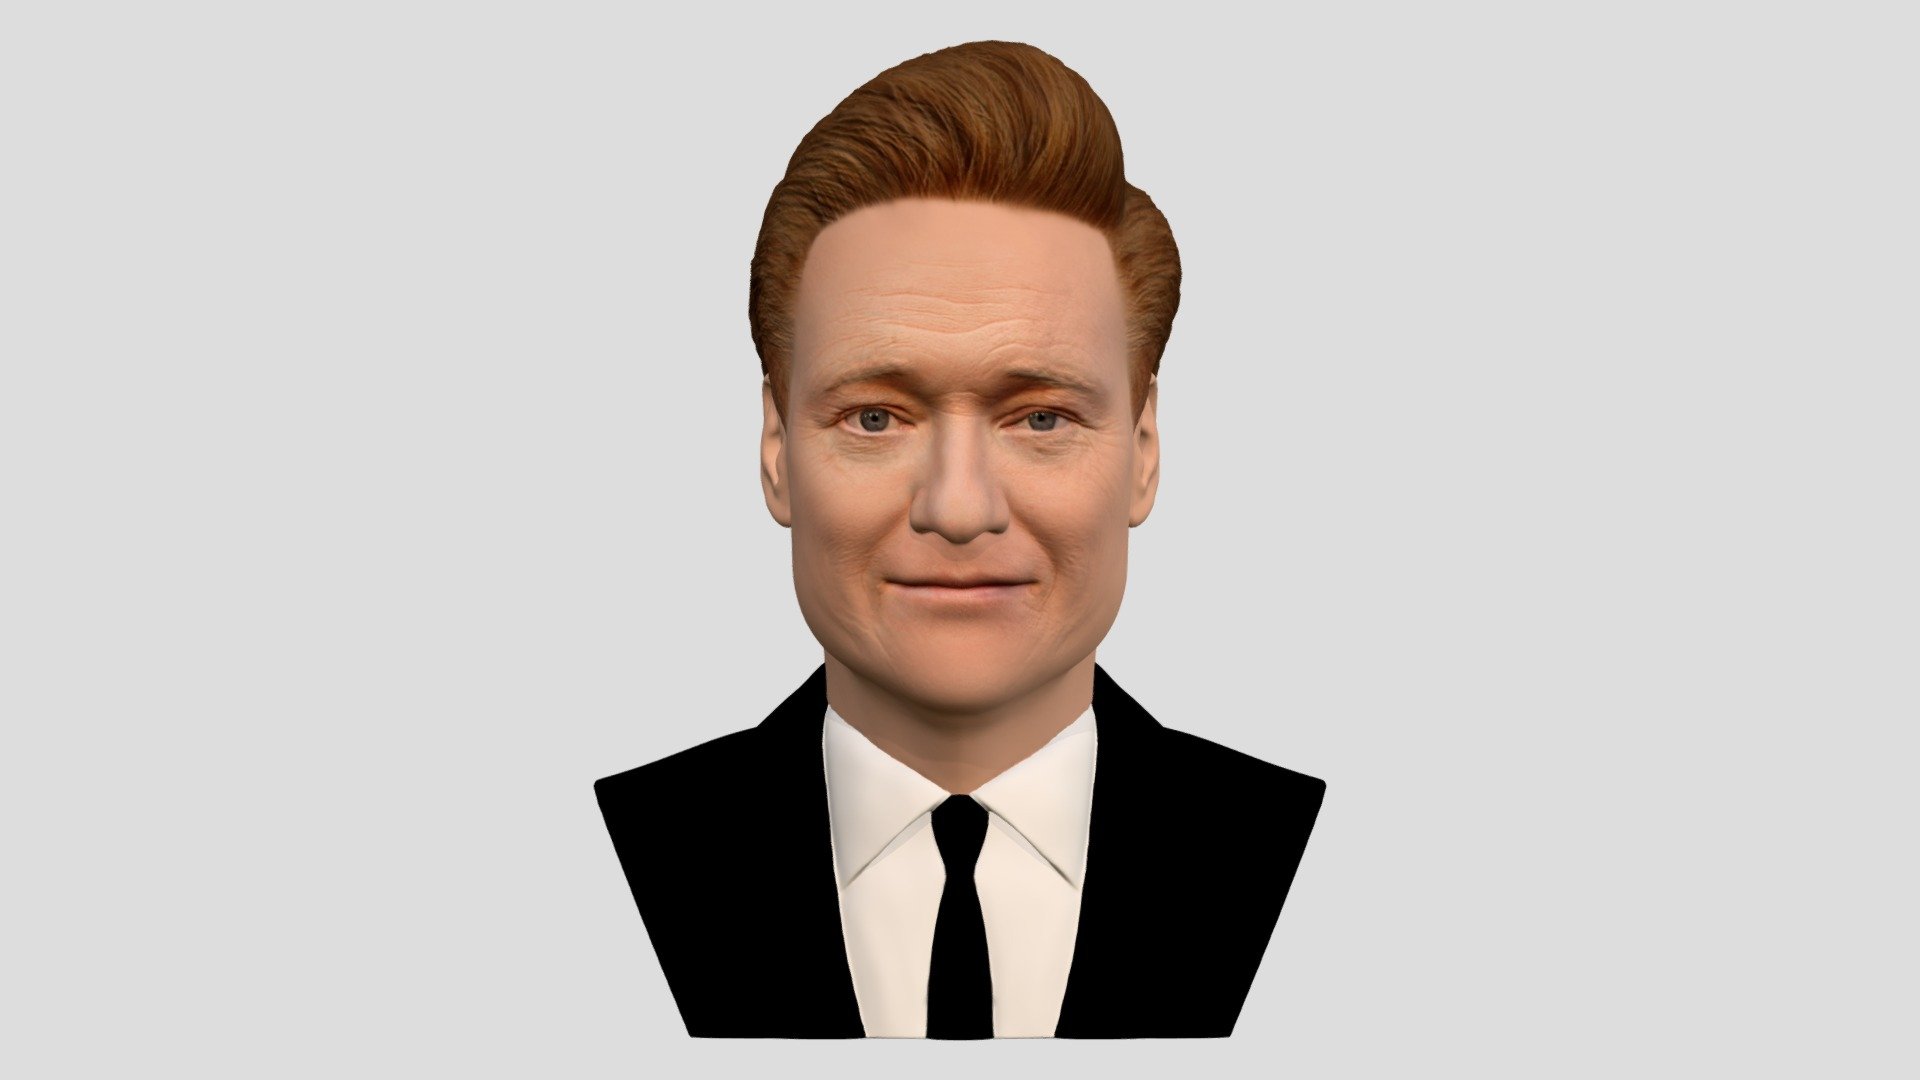 Conan O'Brien bust for full color 3D printing